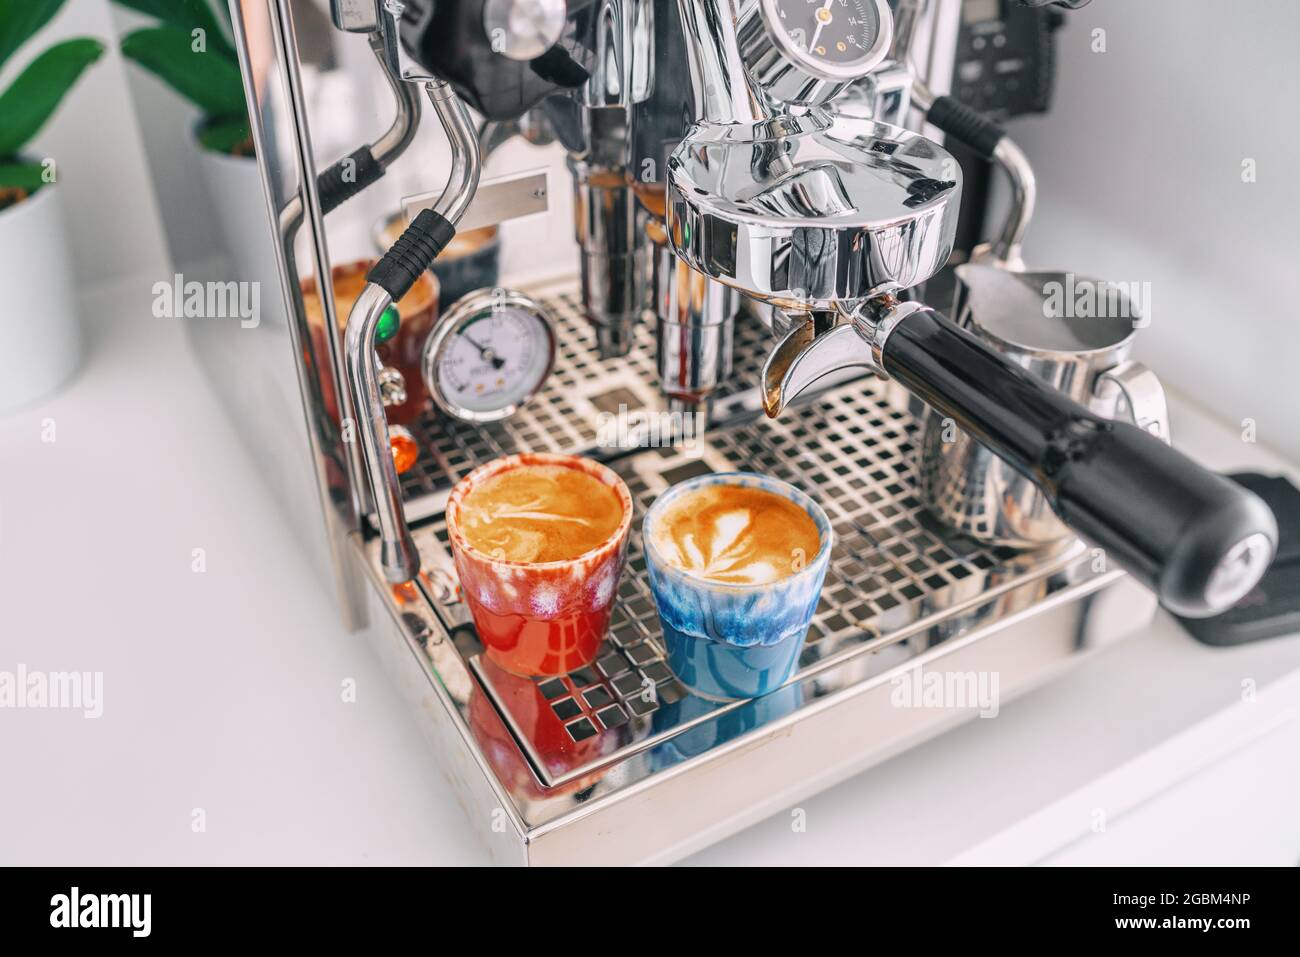 https://c8.alamy.com/comp/2GBM4NP/two-macchiato-shots-in-espresso-cups-on-coffee-machine-at-home-white-apartment-kitchen-modern-interior-lifestyle-2GBM4NP.jpg